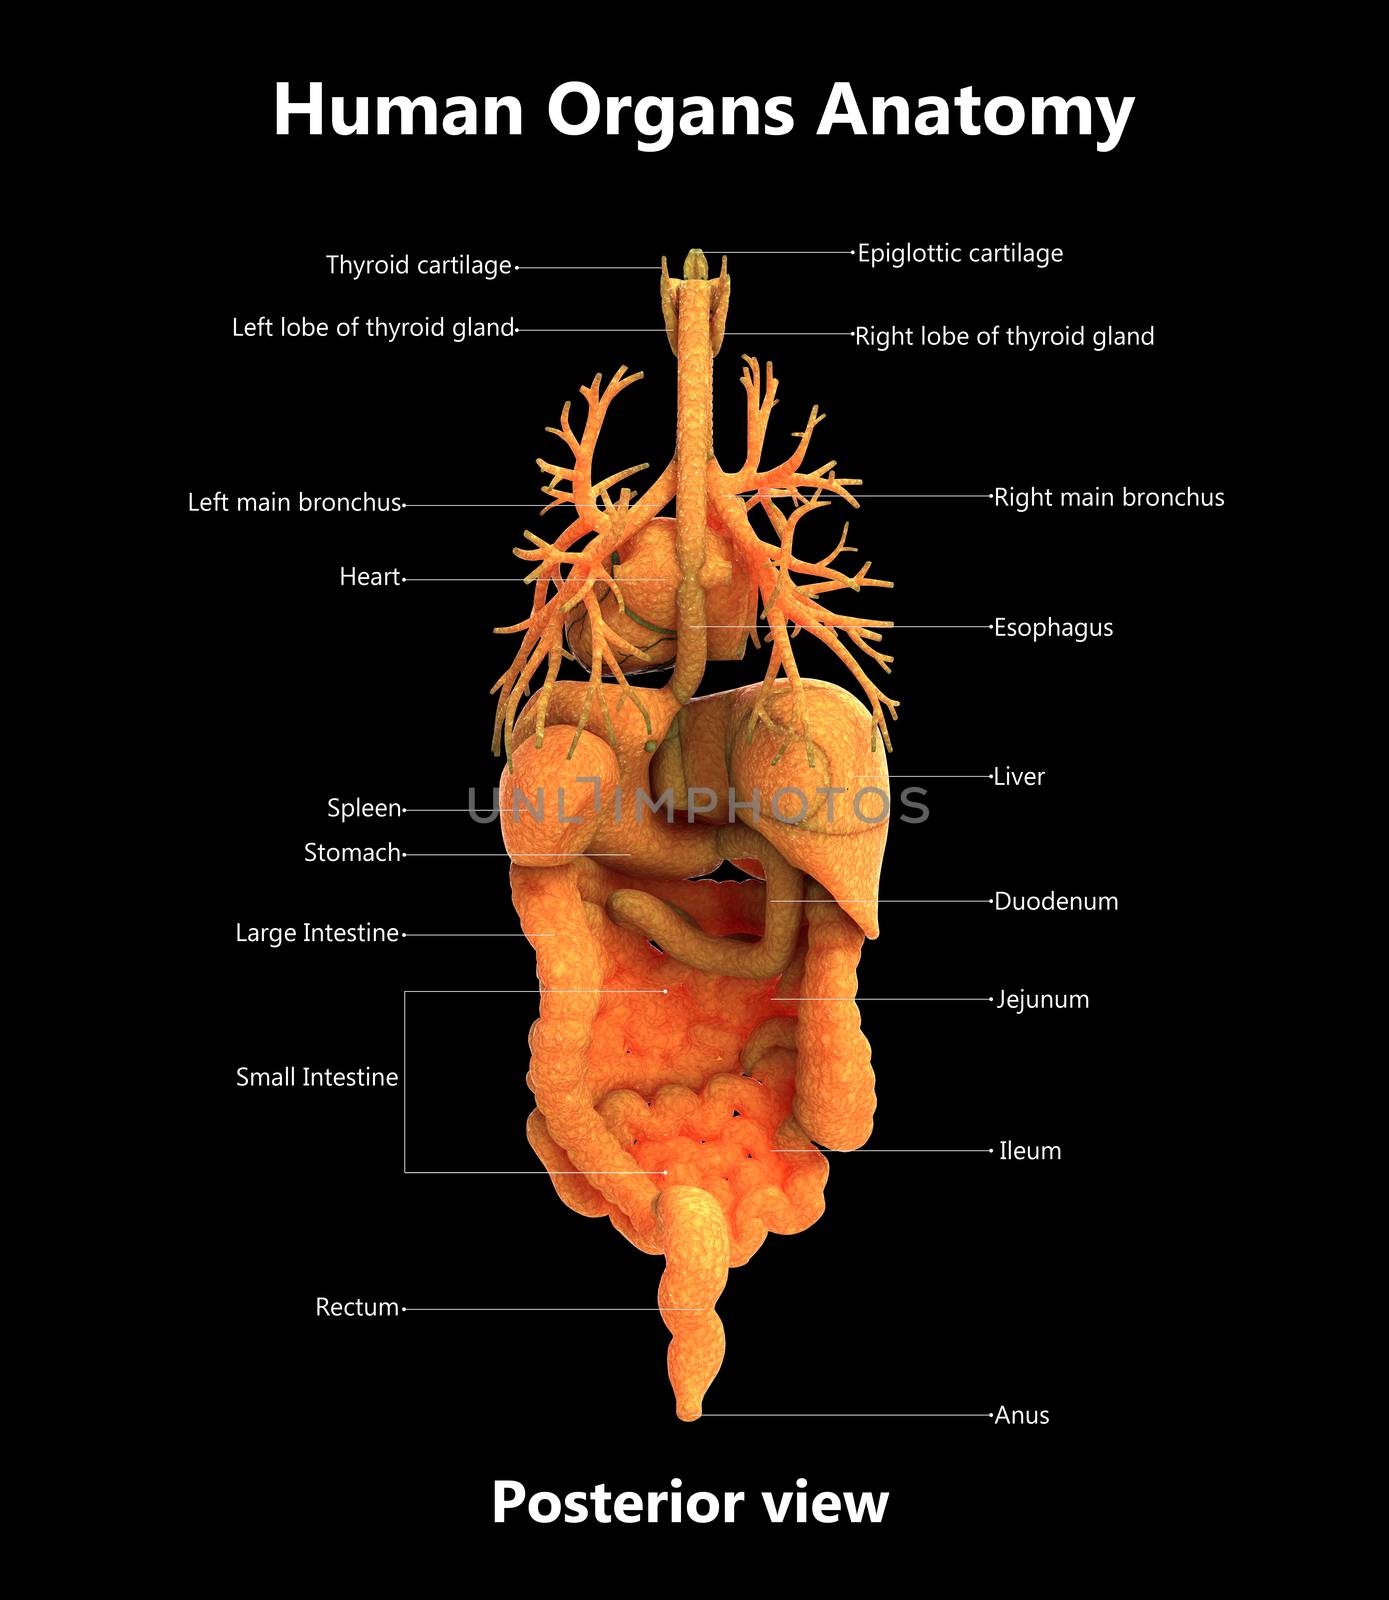 Human Complete Internal Organs Described with Labels Anatomy Posterior View by magicmine